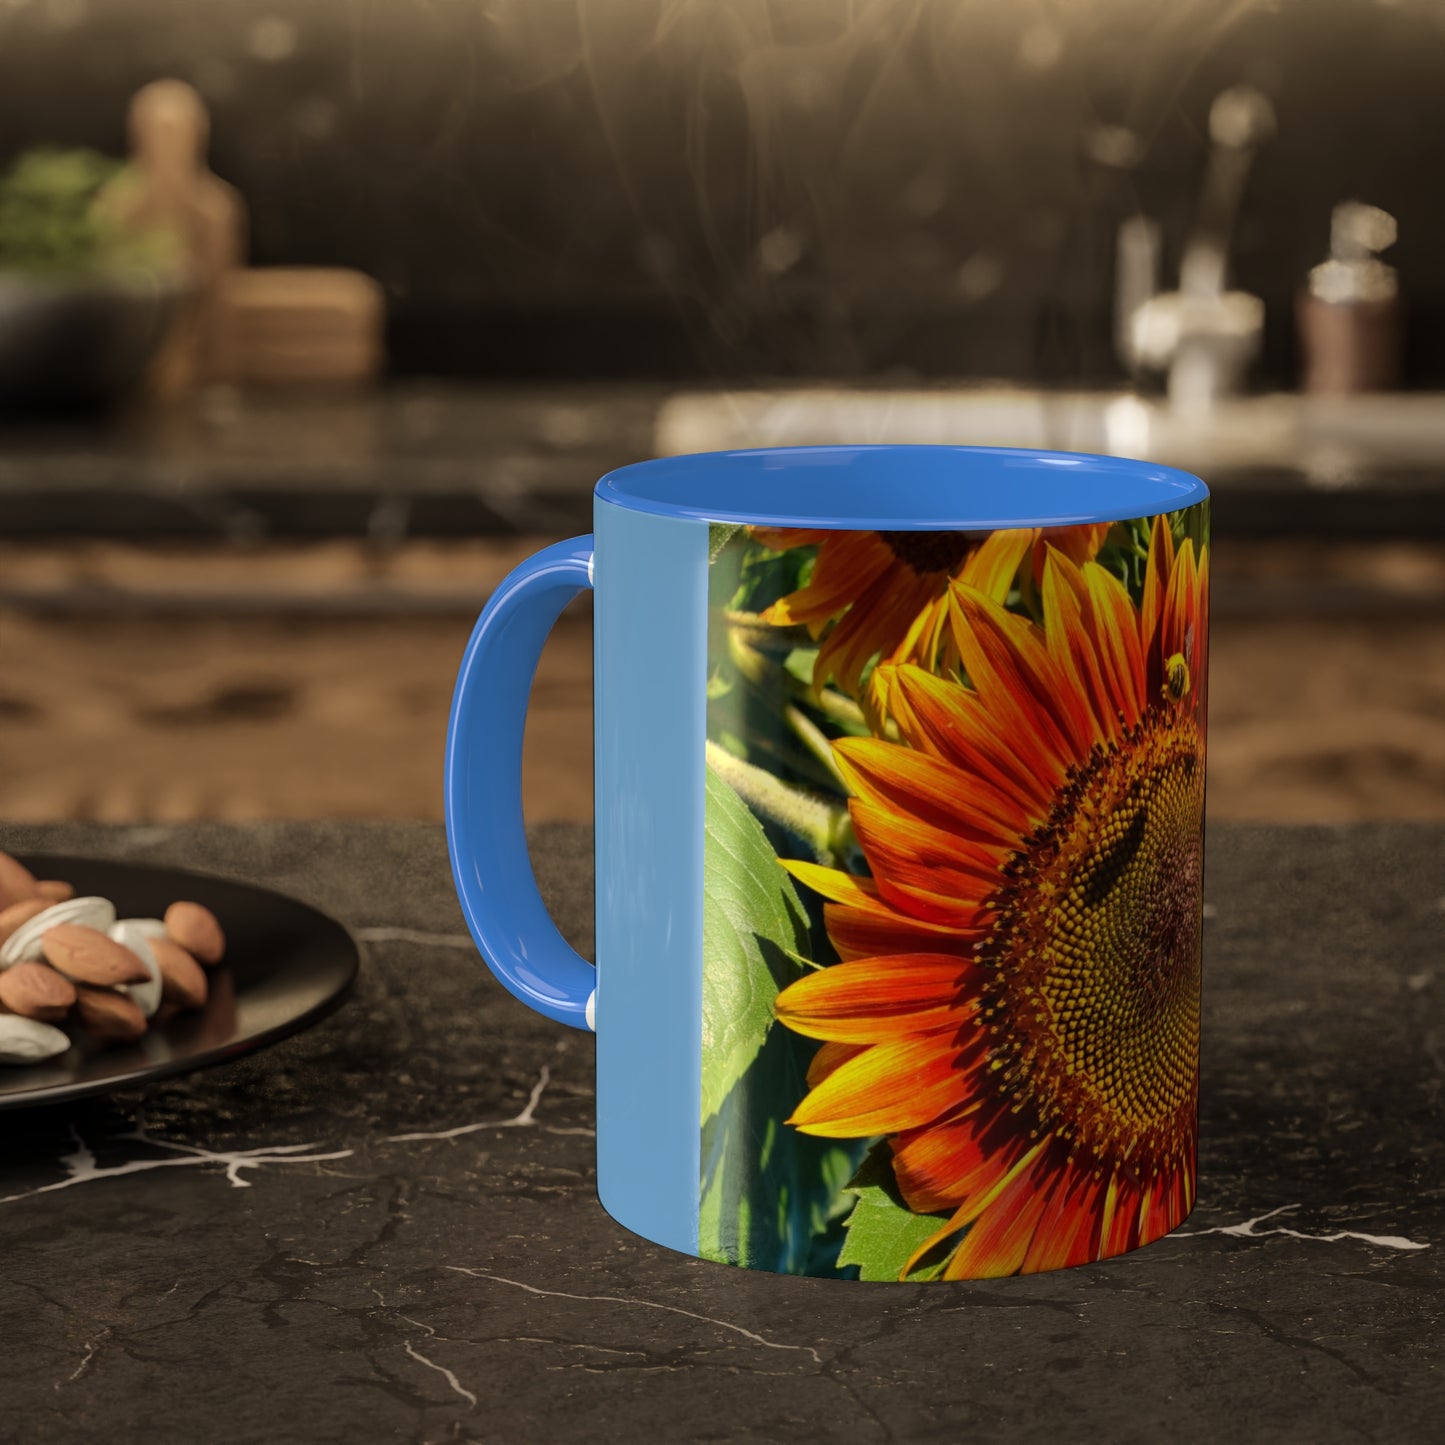 Bumble Bee Sunflower Mug, 11oz (Enchanted Exposures By Tammy Lyne Collection) BLUE